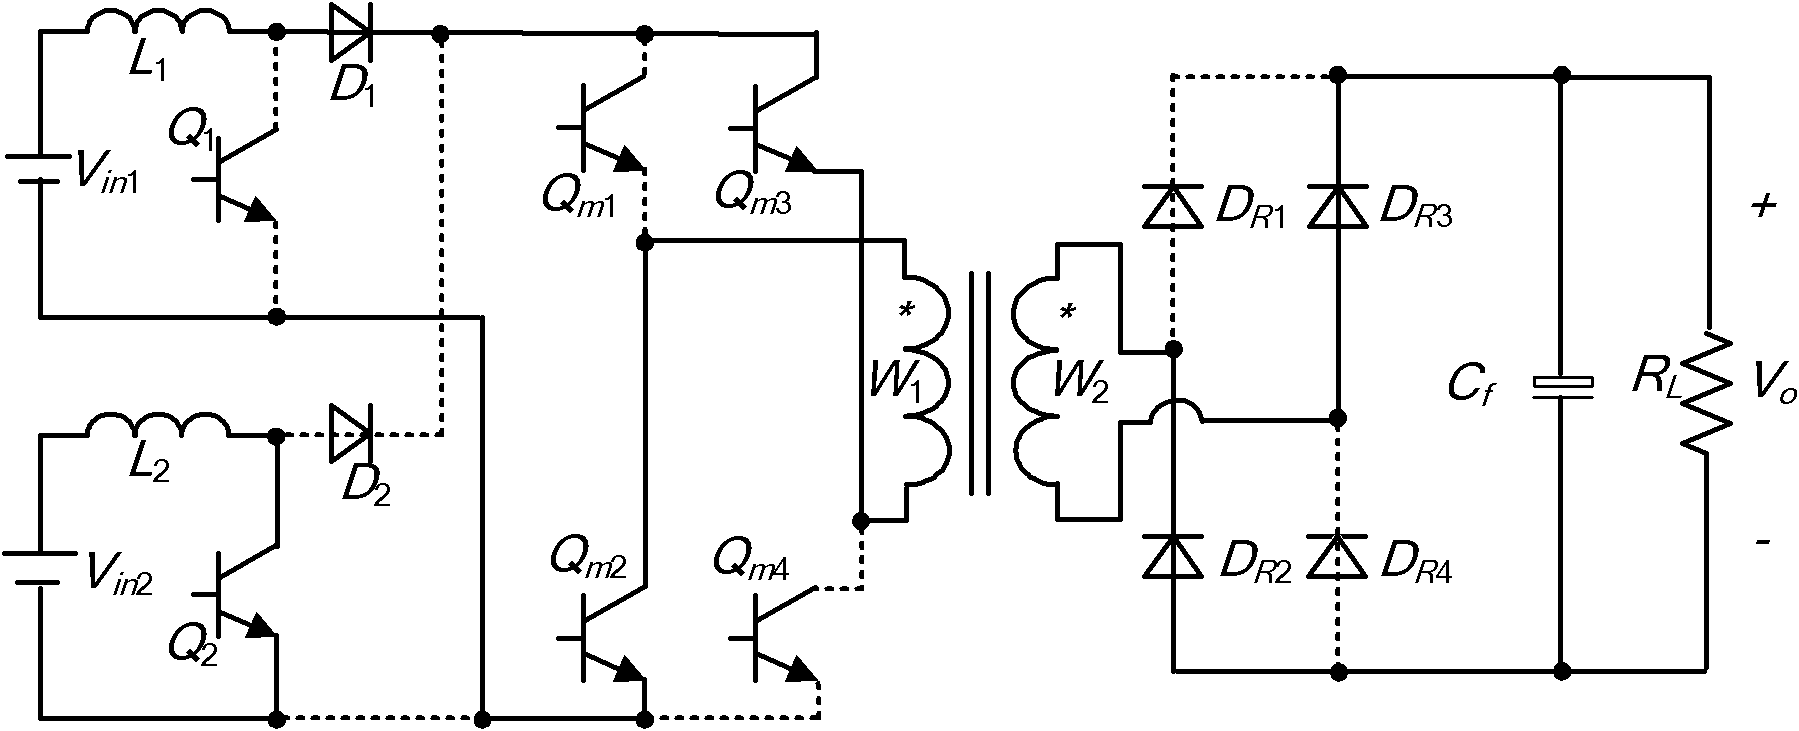 Current-source-type multi-input full-bridge converter with single primary winding